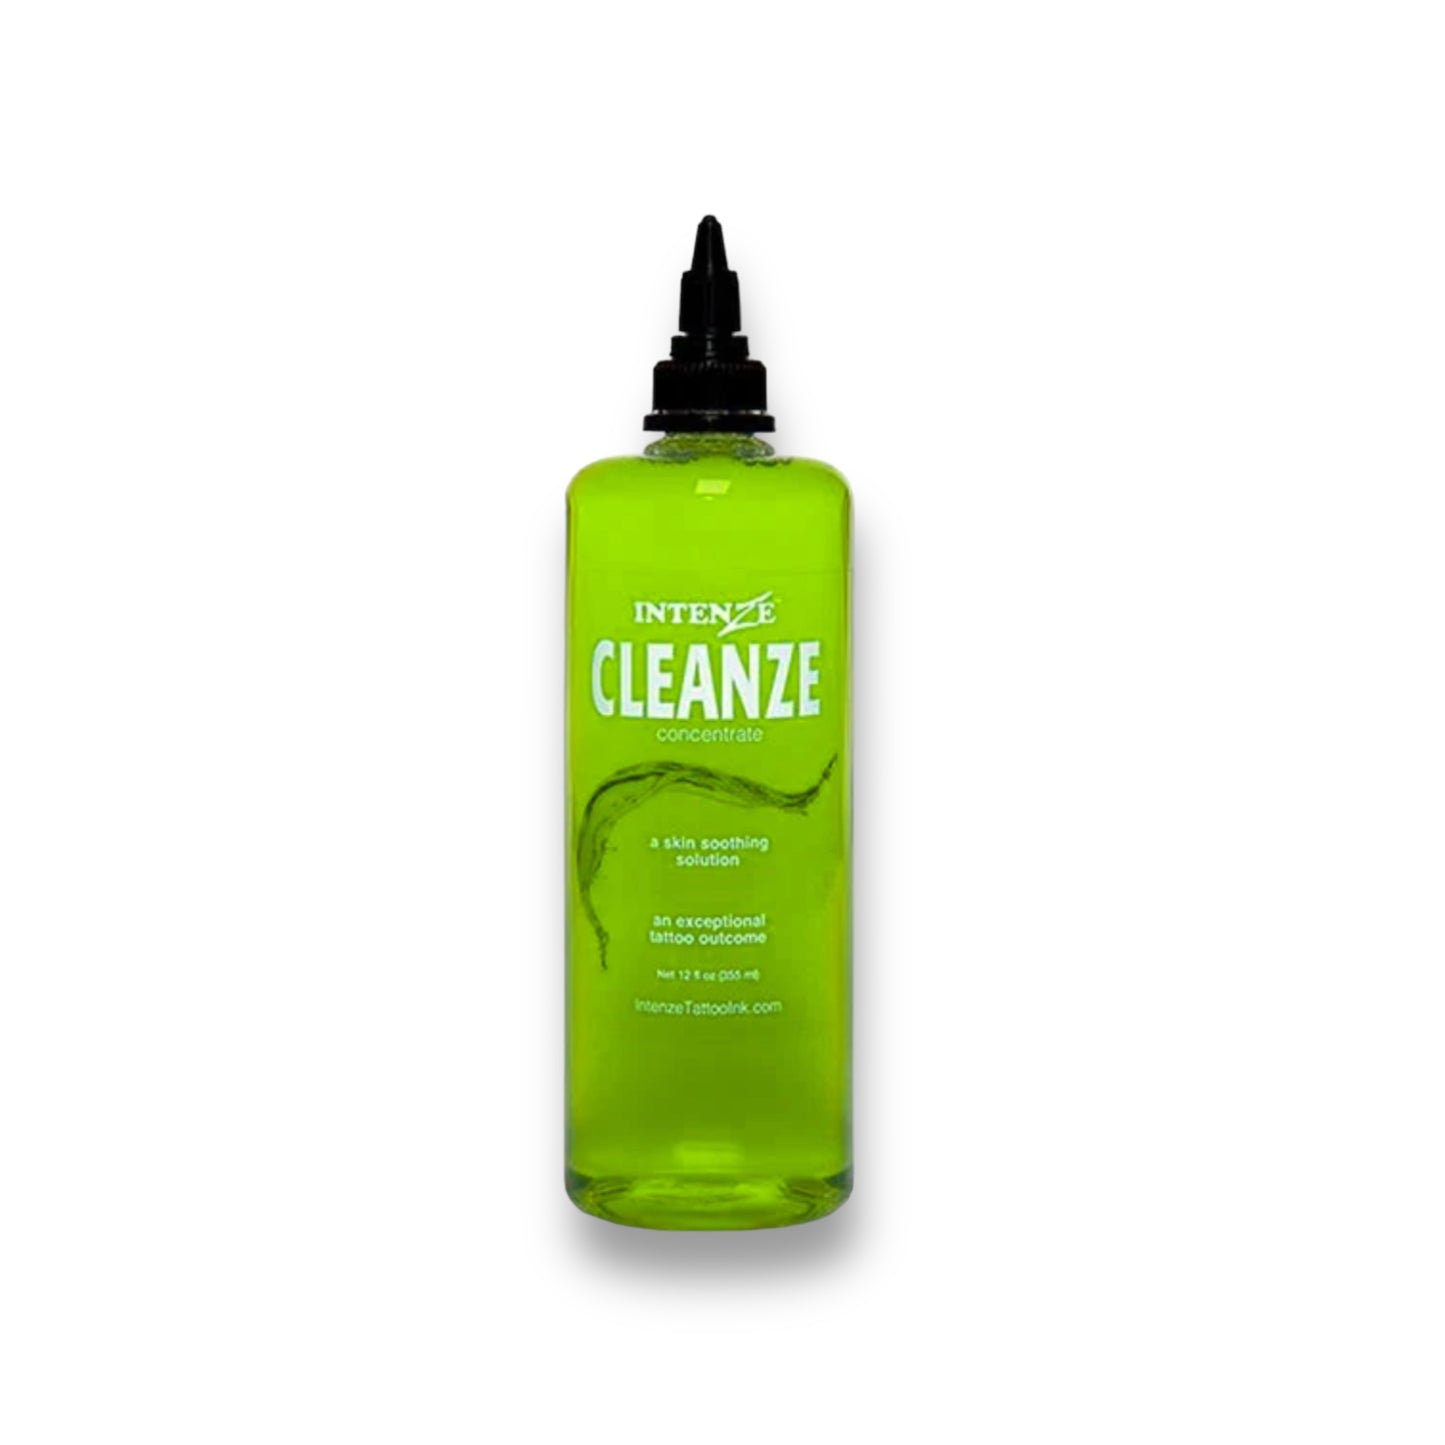 INTENZE-Cleanze Concentrate 濃縮スキンクレンザー 12oz